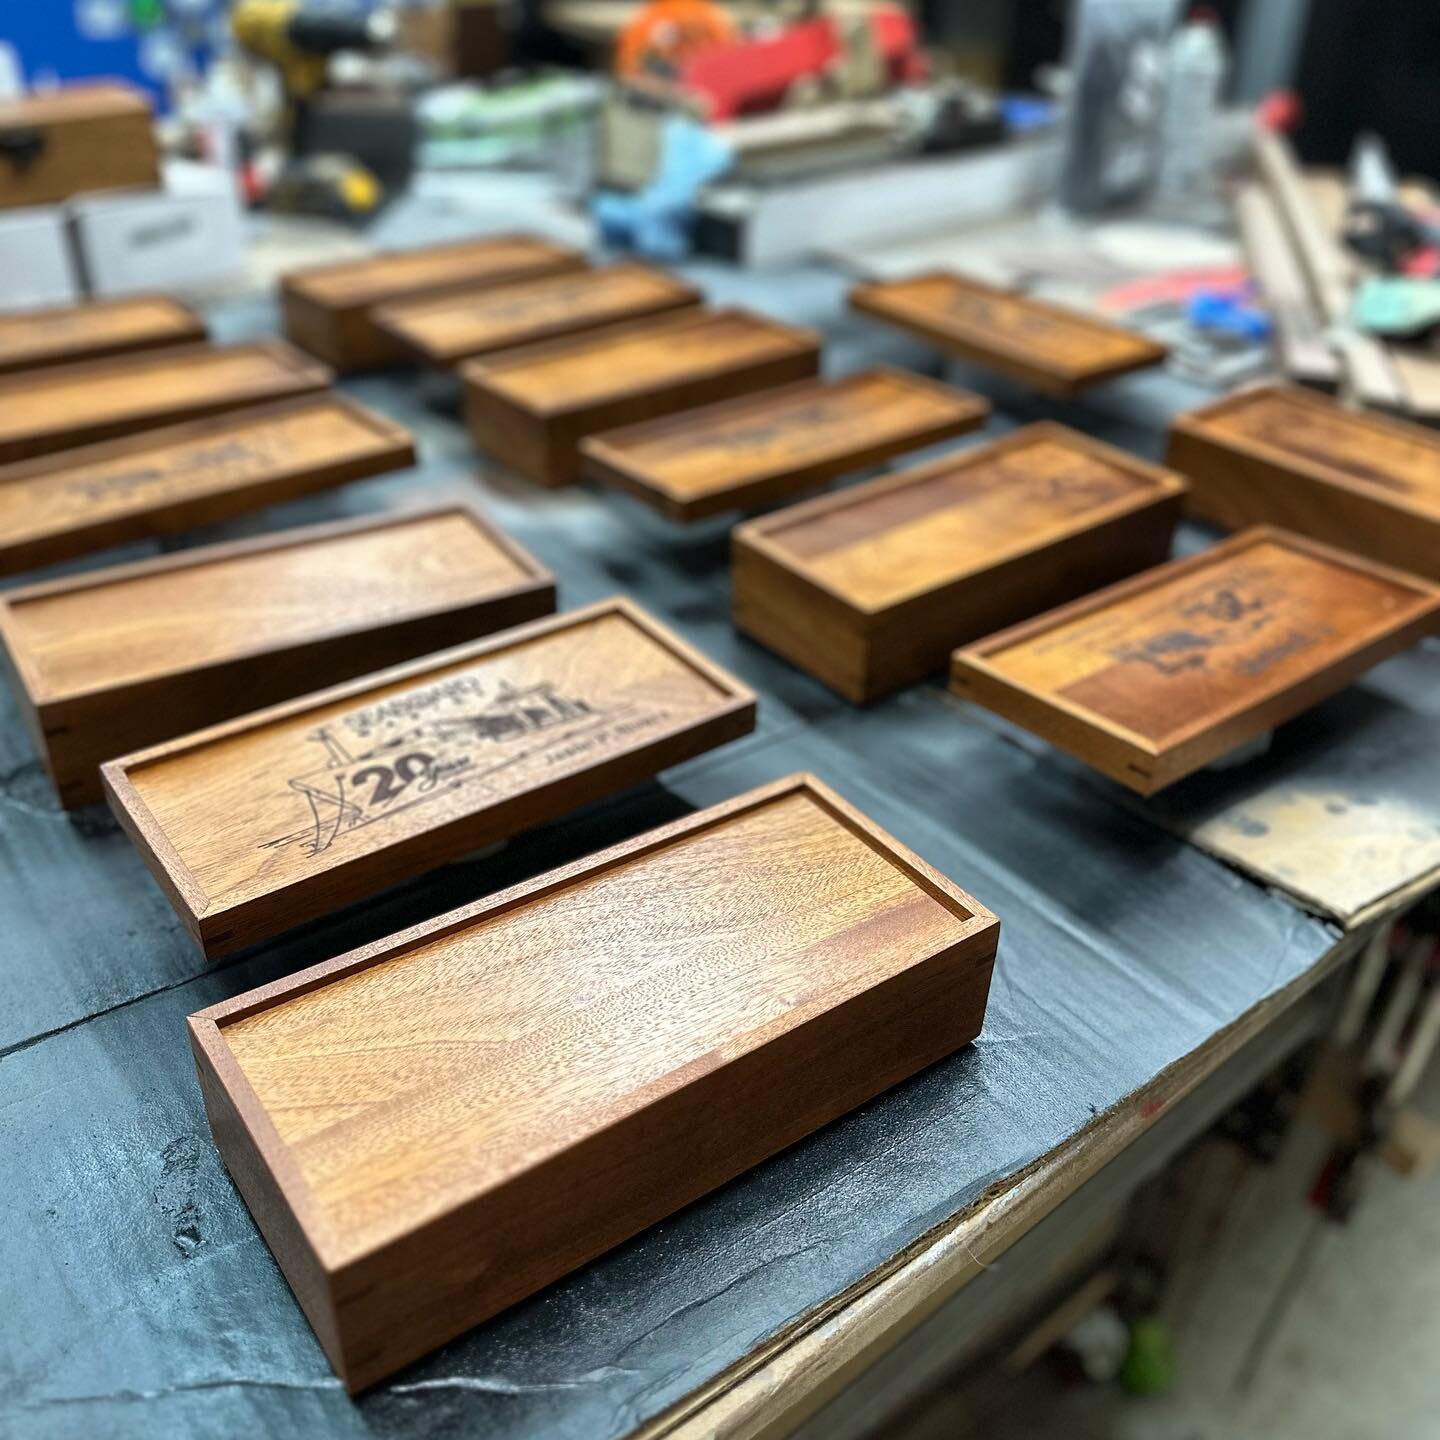 Mahogany anniversary boxes have been engraved and finished with couple of coats of lacquer.. Next is to add hardware, deliver and of course get paid 😂! #mahogany #anniversarygift #boxes #personalized #personalizedgifts #engraved #engravedgifts